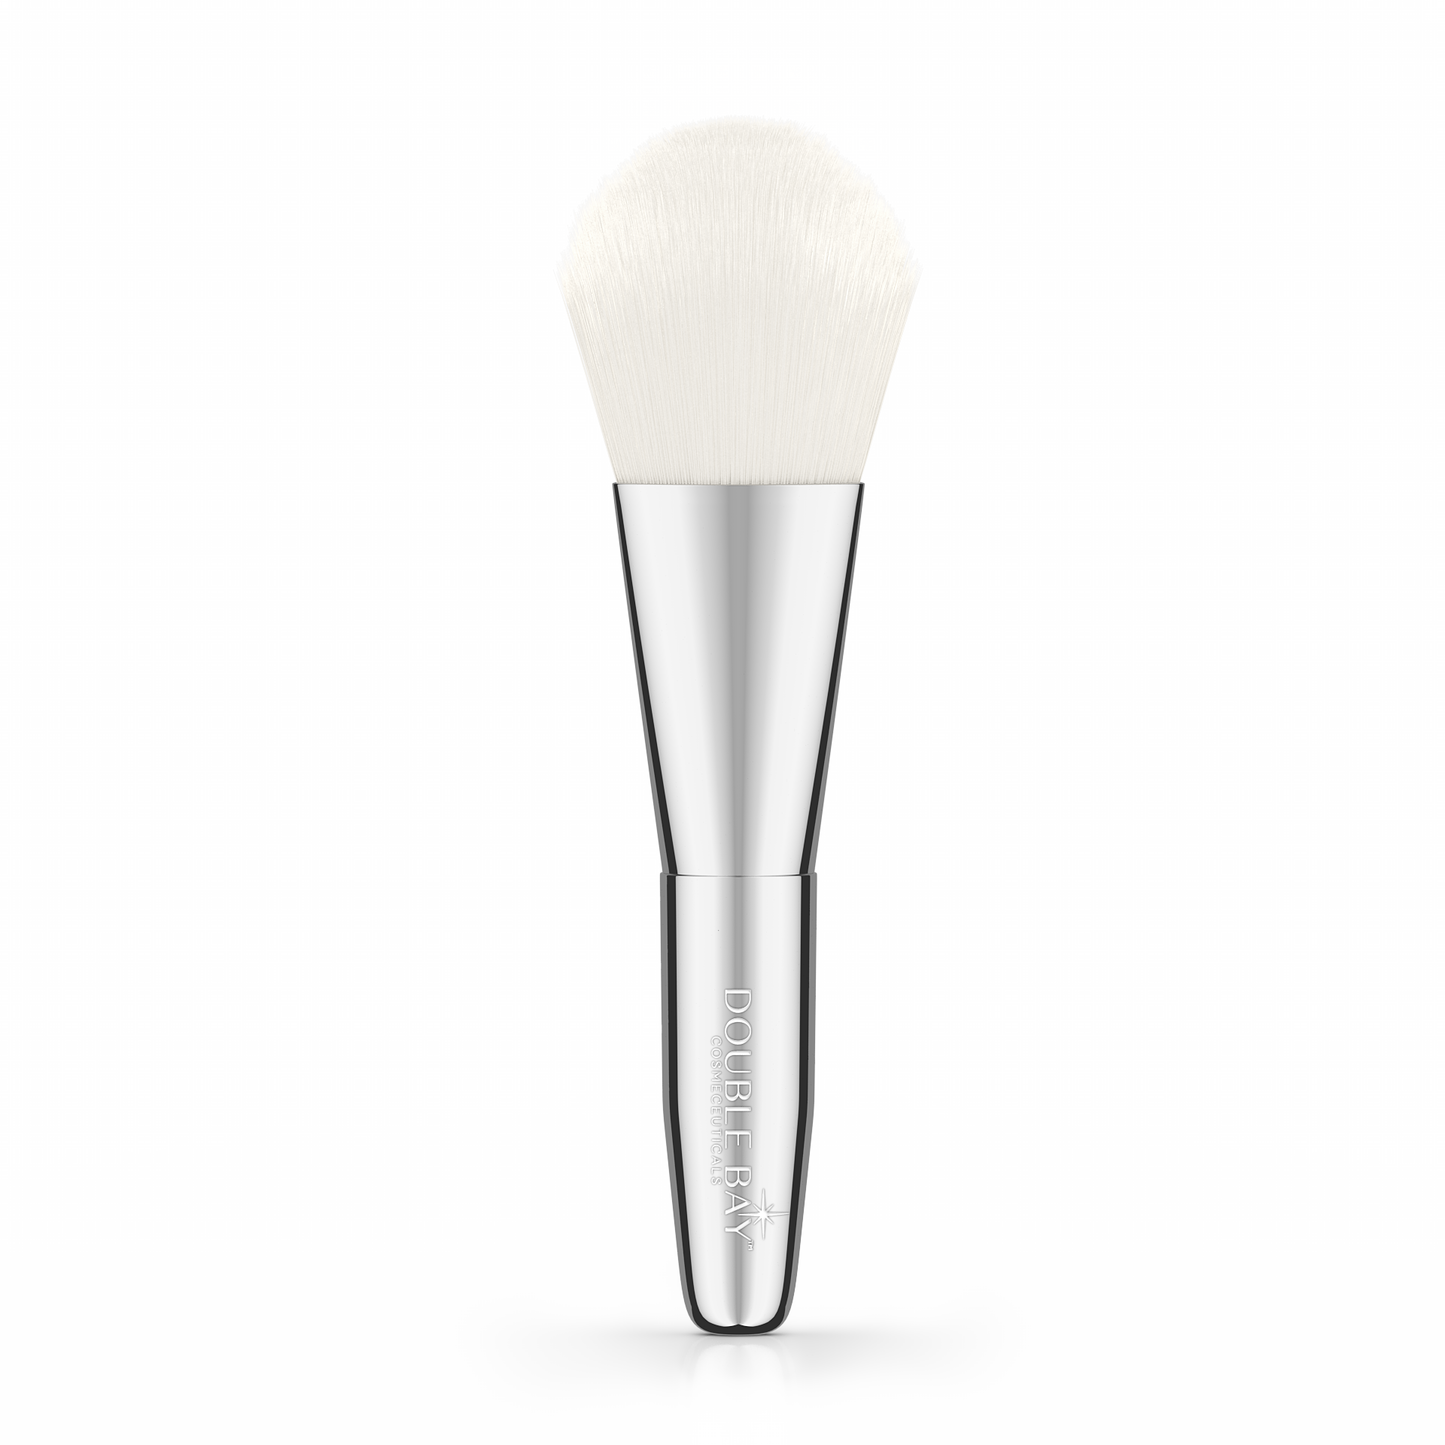 Exclusive Double Bay Cosmeceuticals Brush